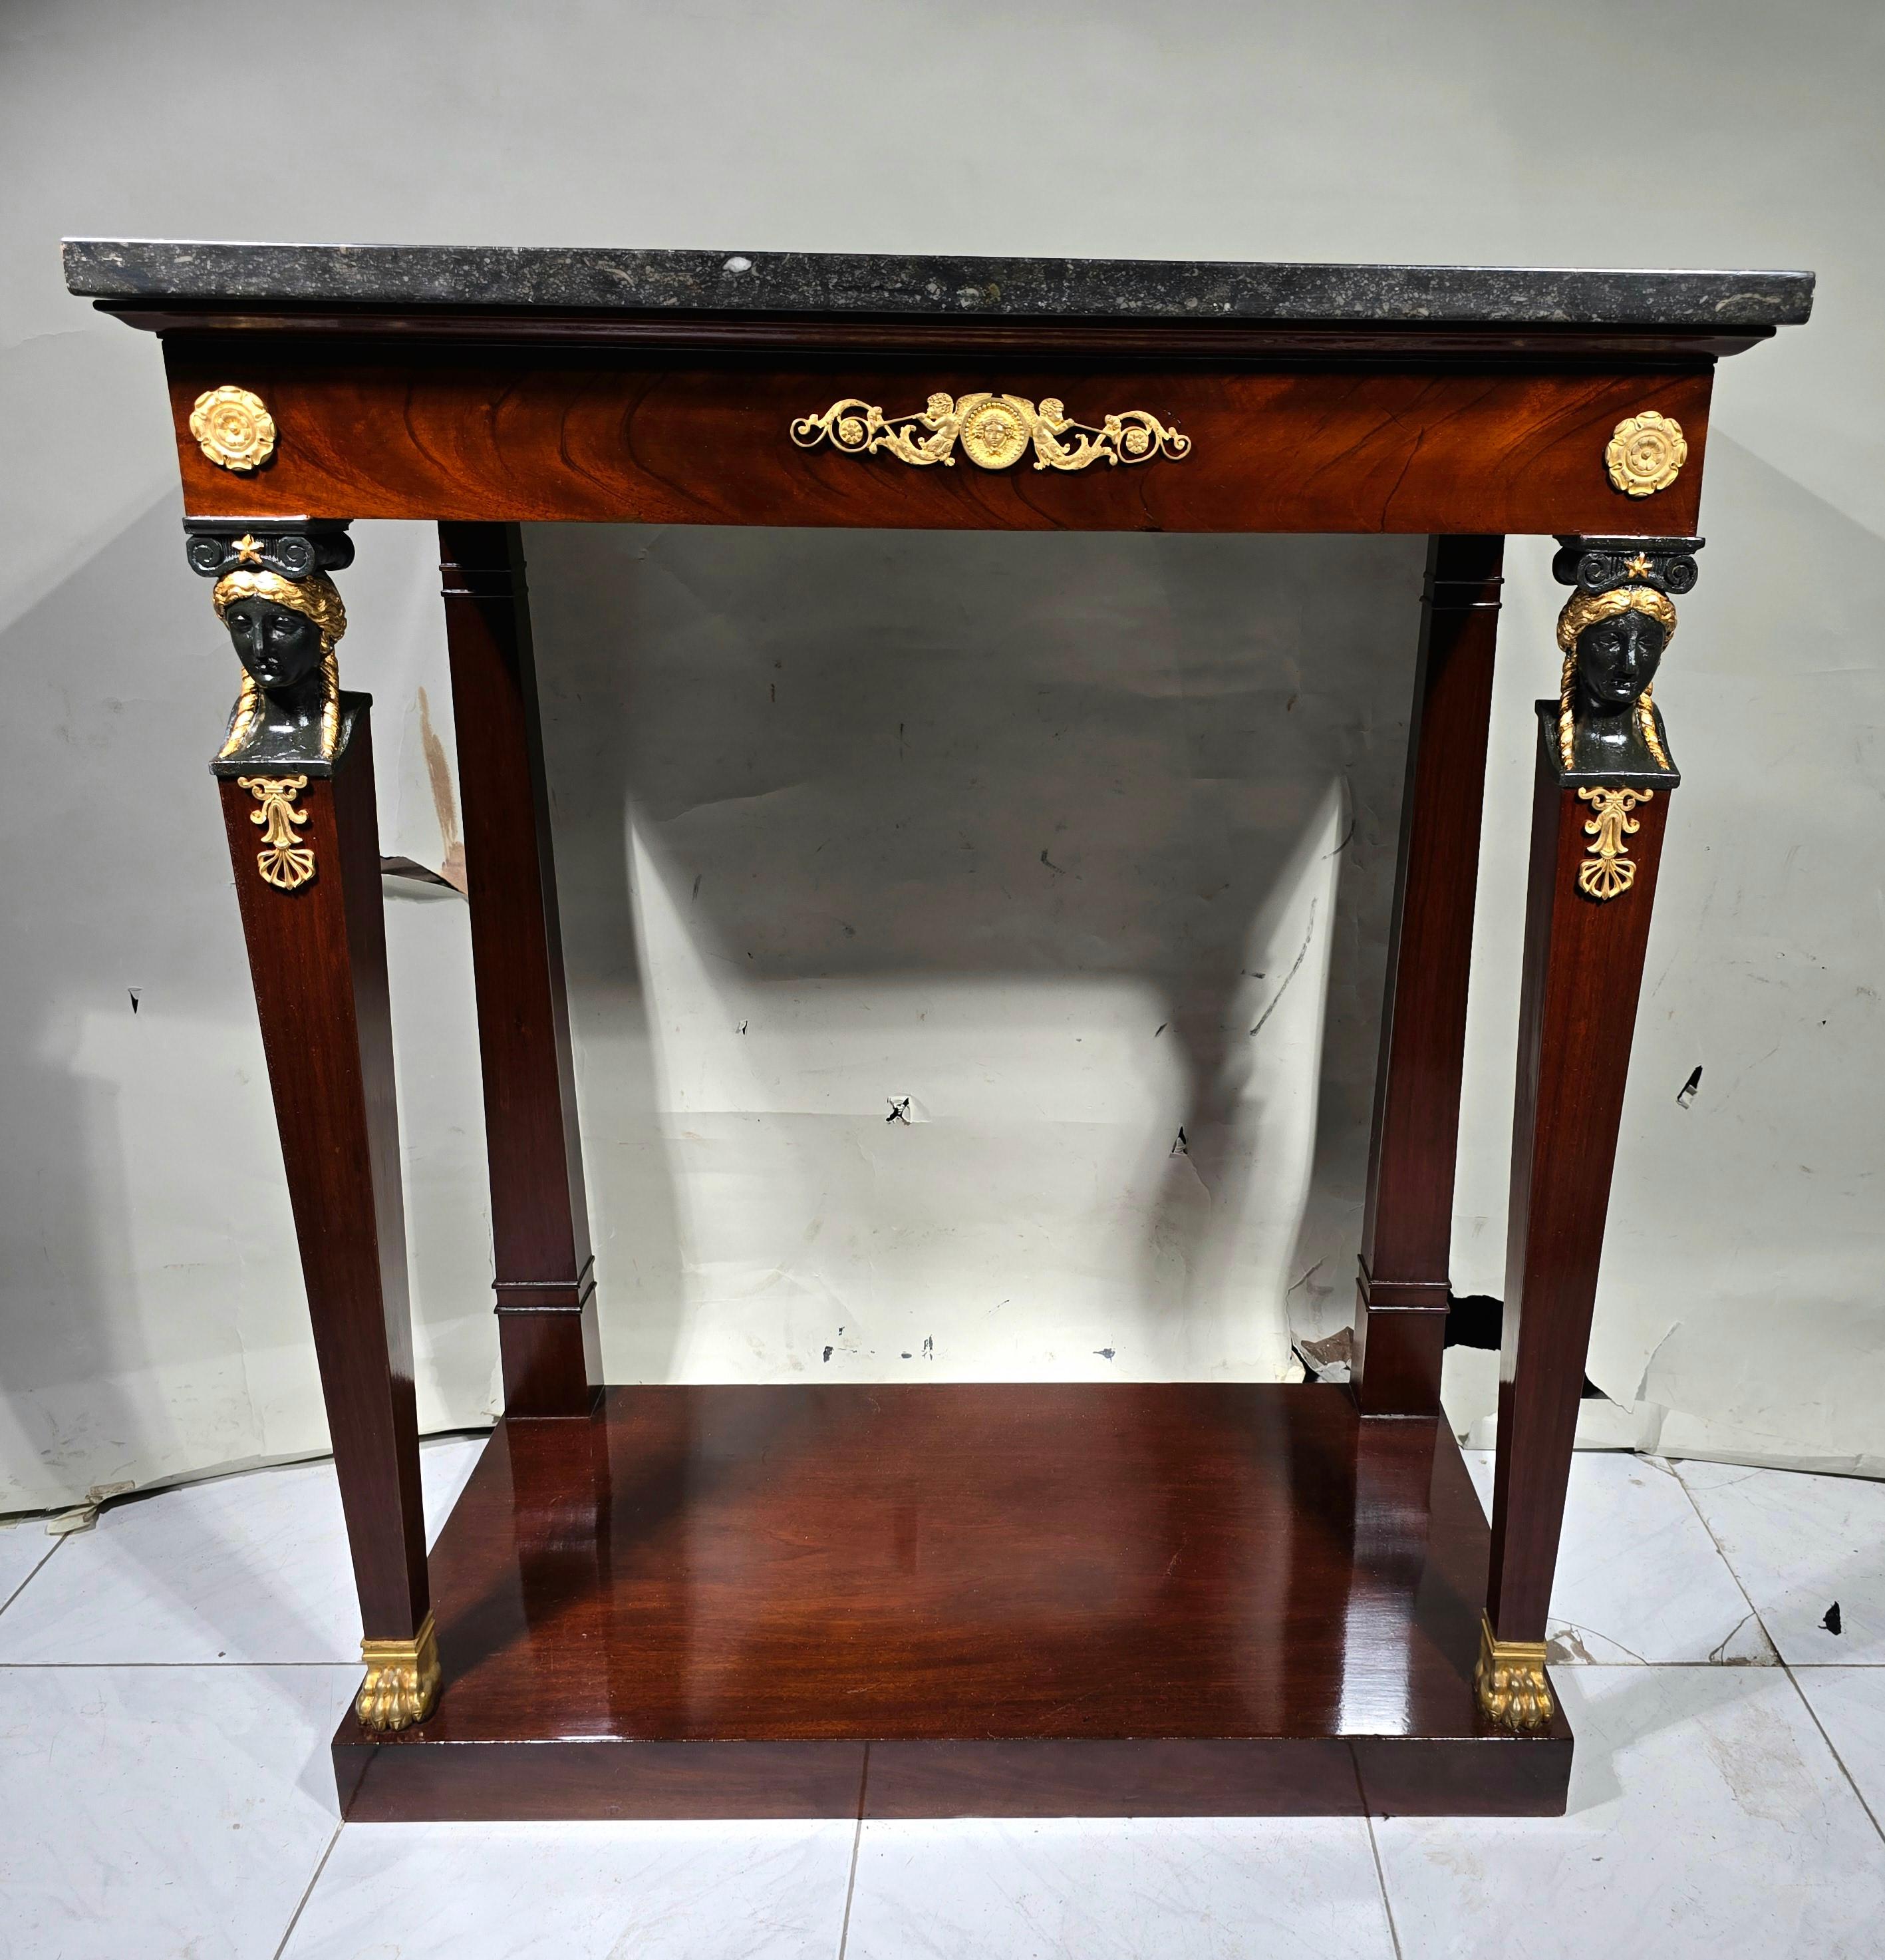 This mahogany console epitomizes the elegance and refinement of the Empire era. Its front legs adorned with caryatids and its rear legs in pilasters add a touch of grandeur to its timeless design. Dating back to the Consulate period, this piece is a